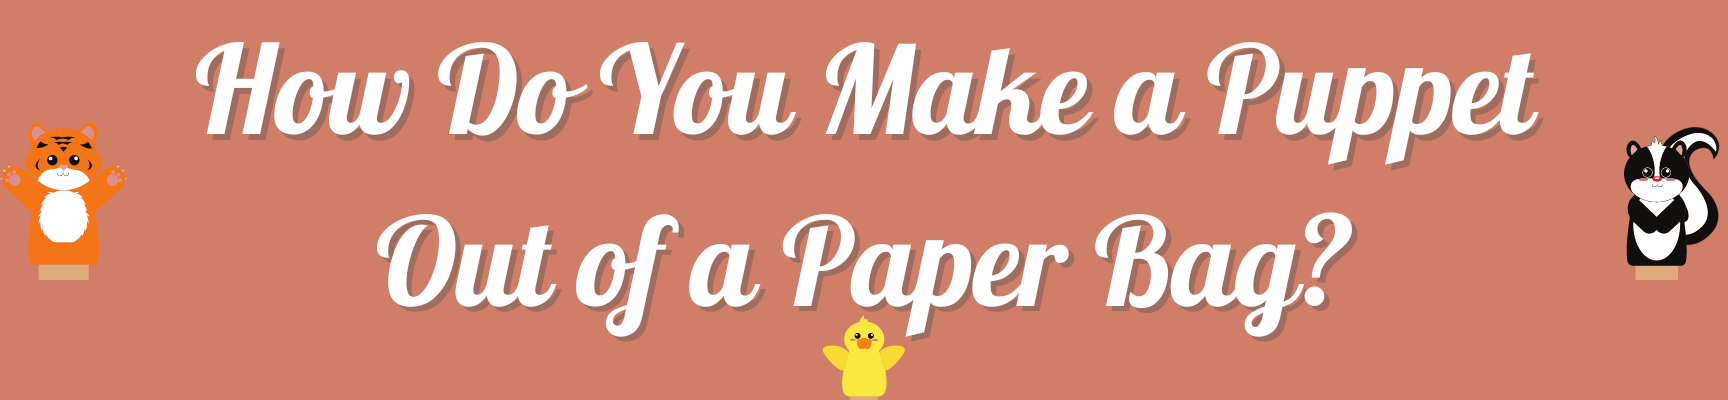 How Do You Make a Puppet Out of a Paper Bag?